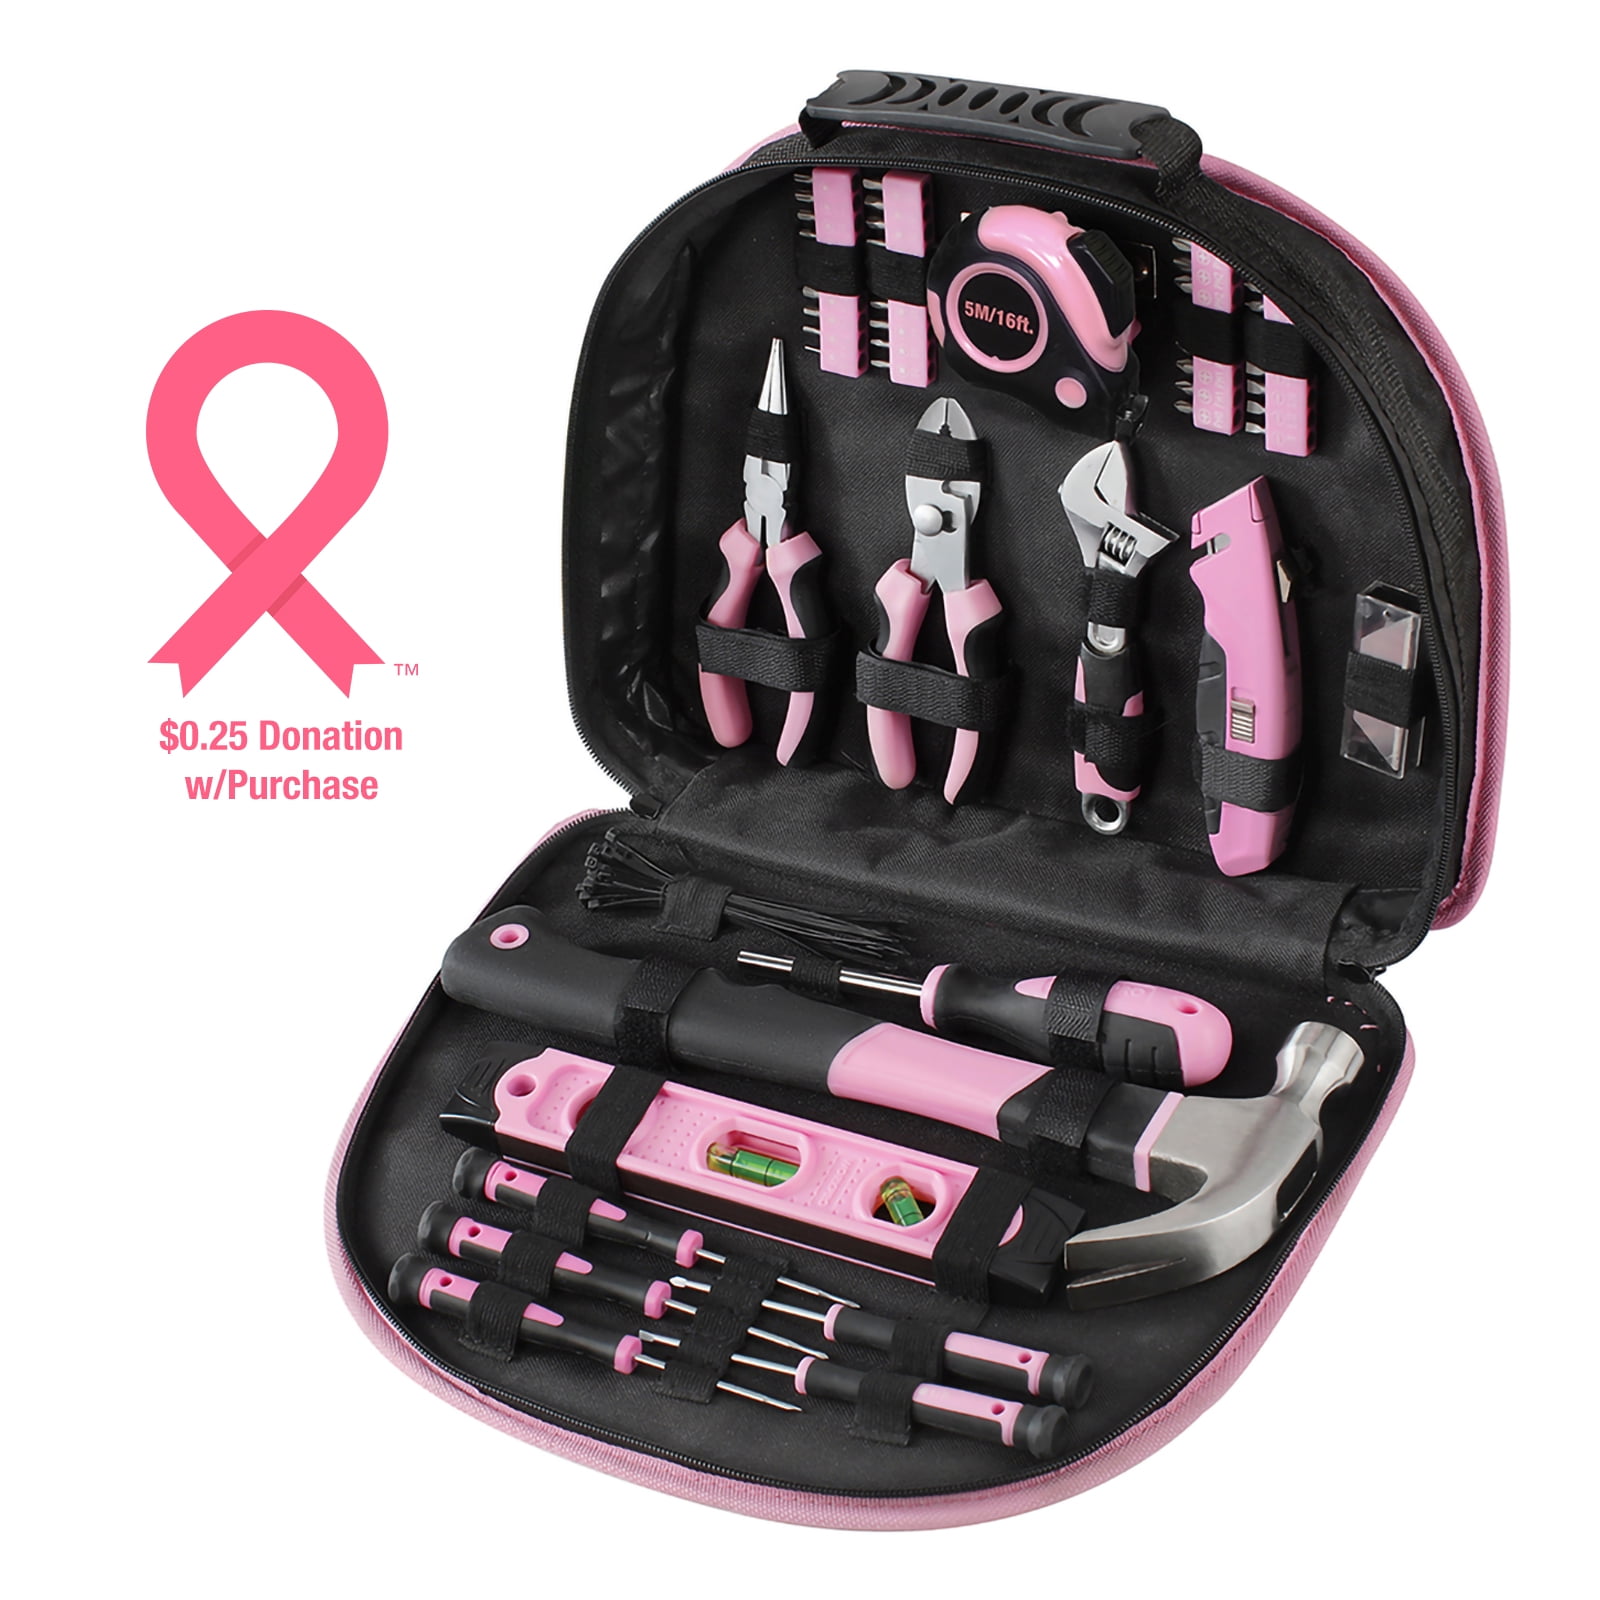 Long Lasting Chrome Finish Tools Home Maintenance Durable Perfect for DIY Ladies Hand Tool Set with Easy Carrying Round Pouch WORKPRO 103-Piece Pink Tool Kit 